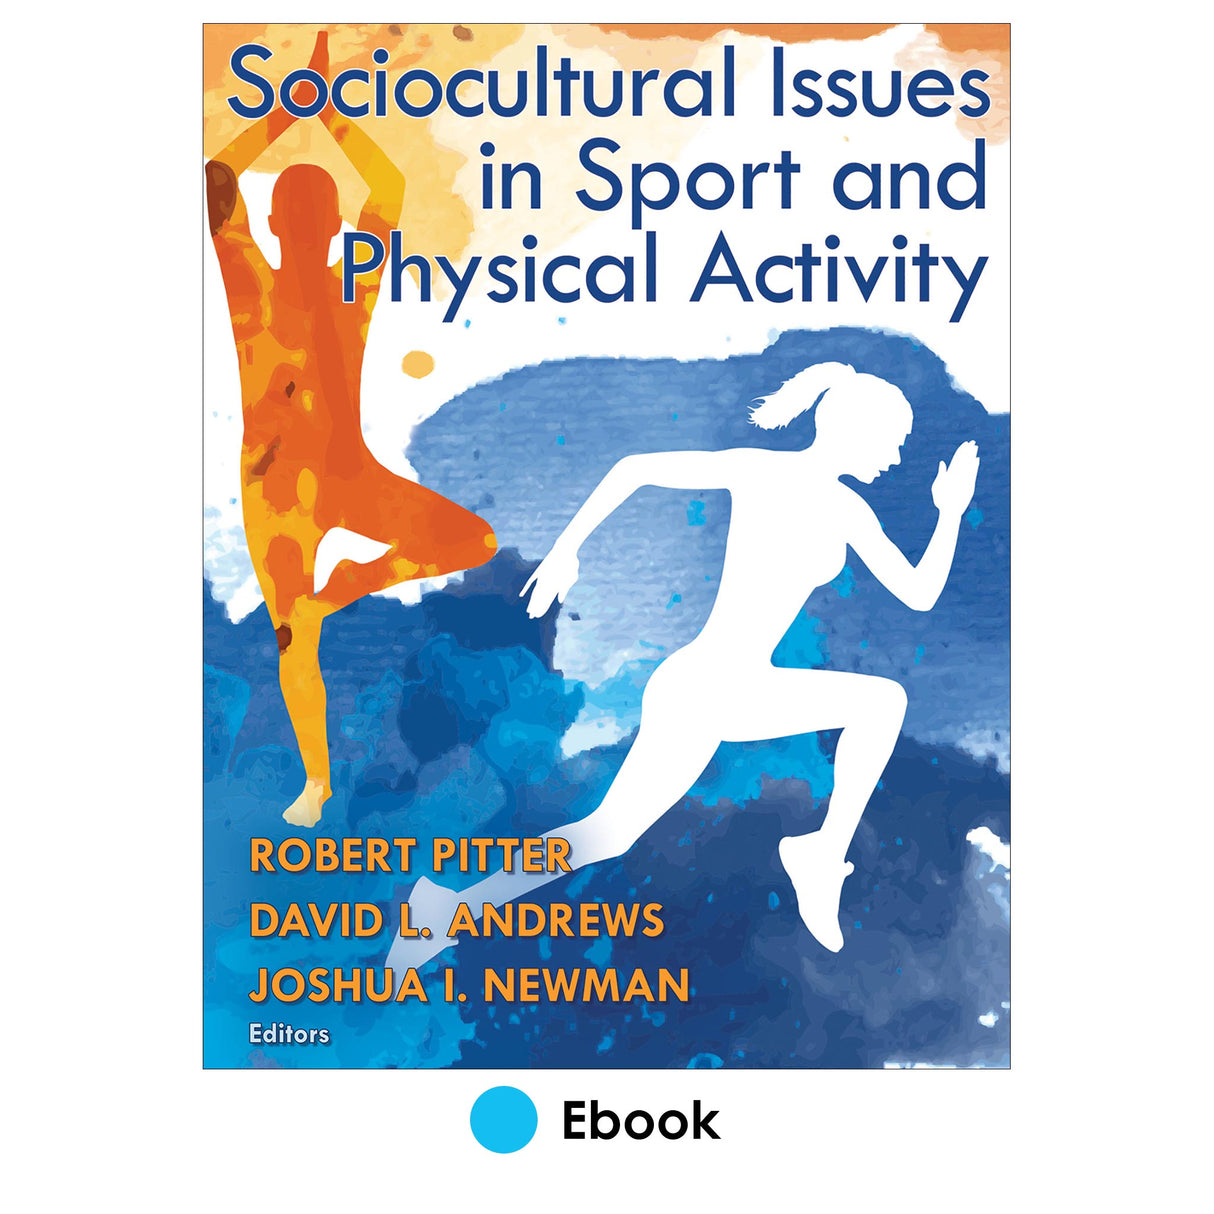 Sociocultural Issues in Sport and Physical Activity epub